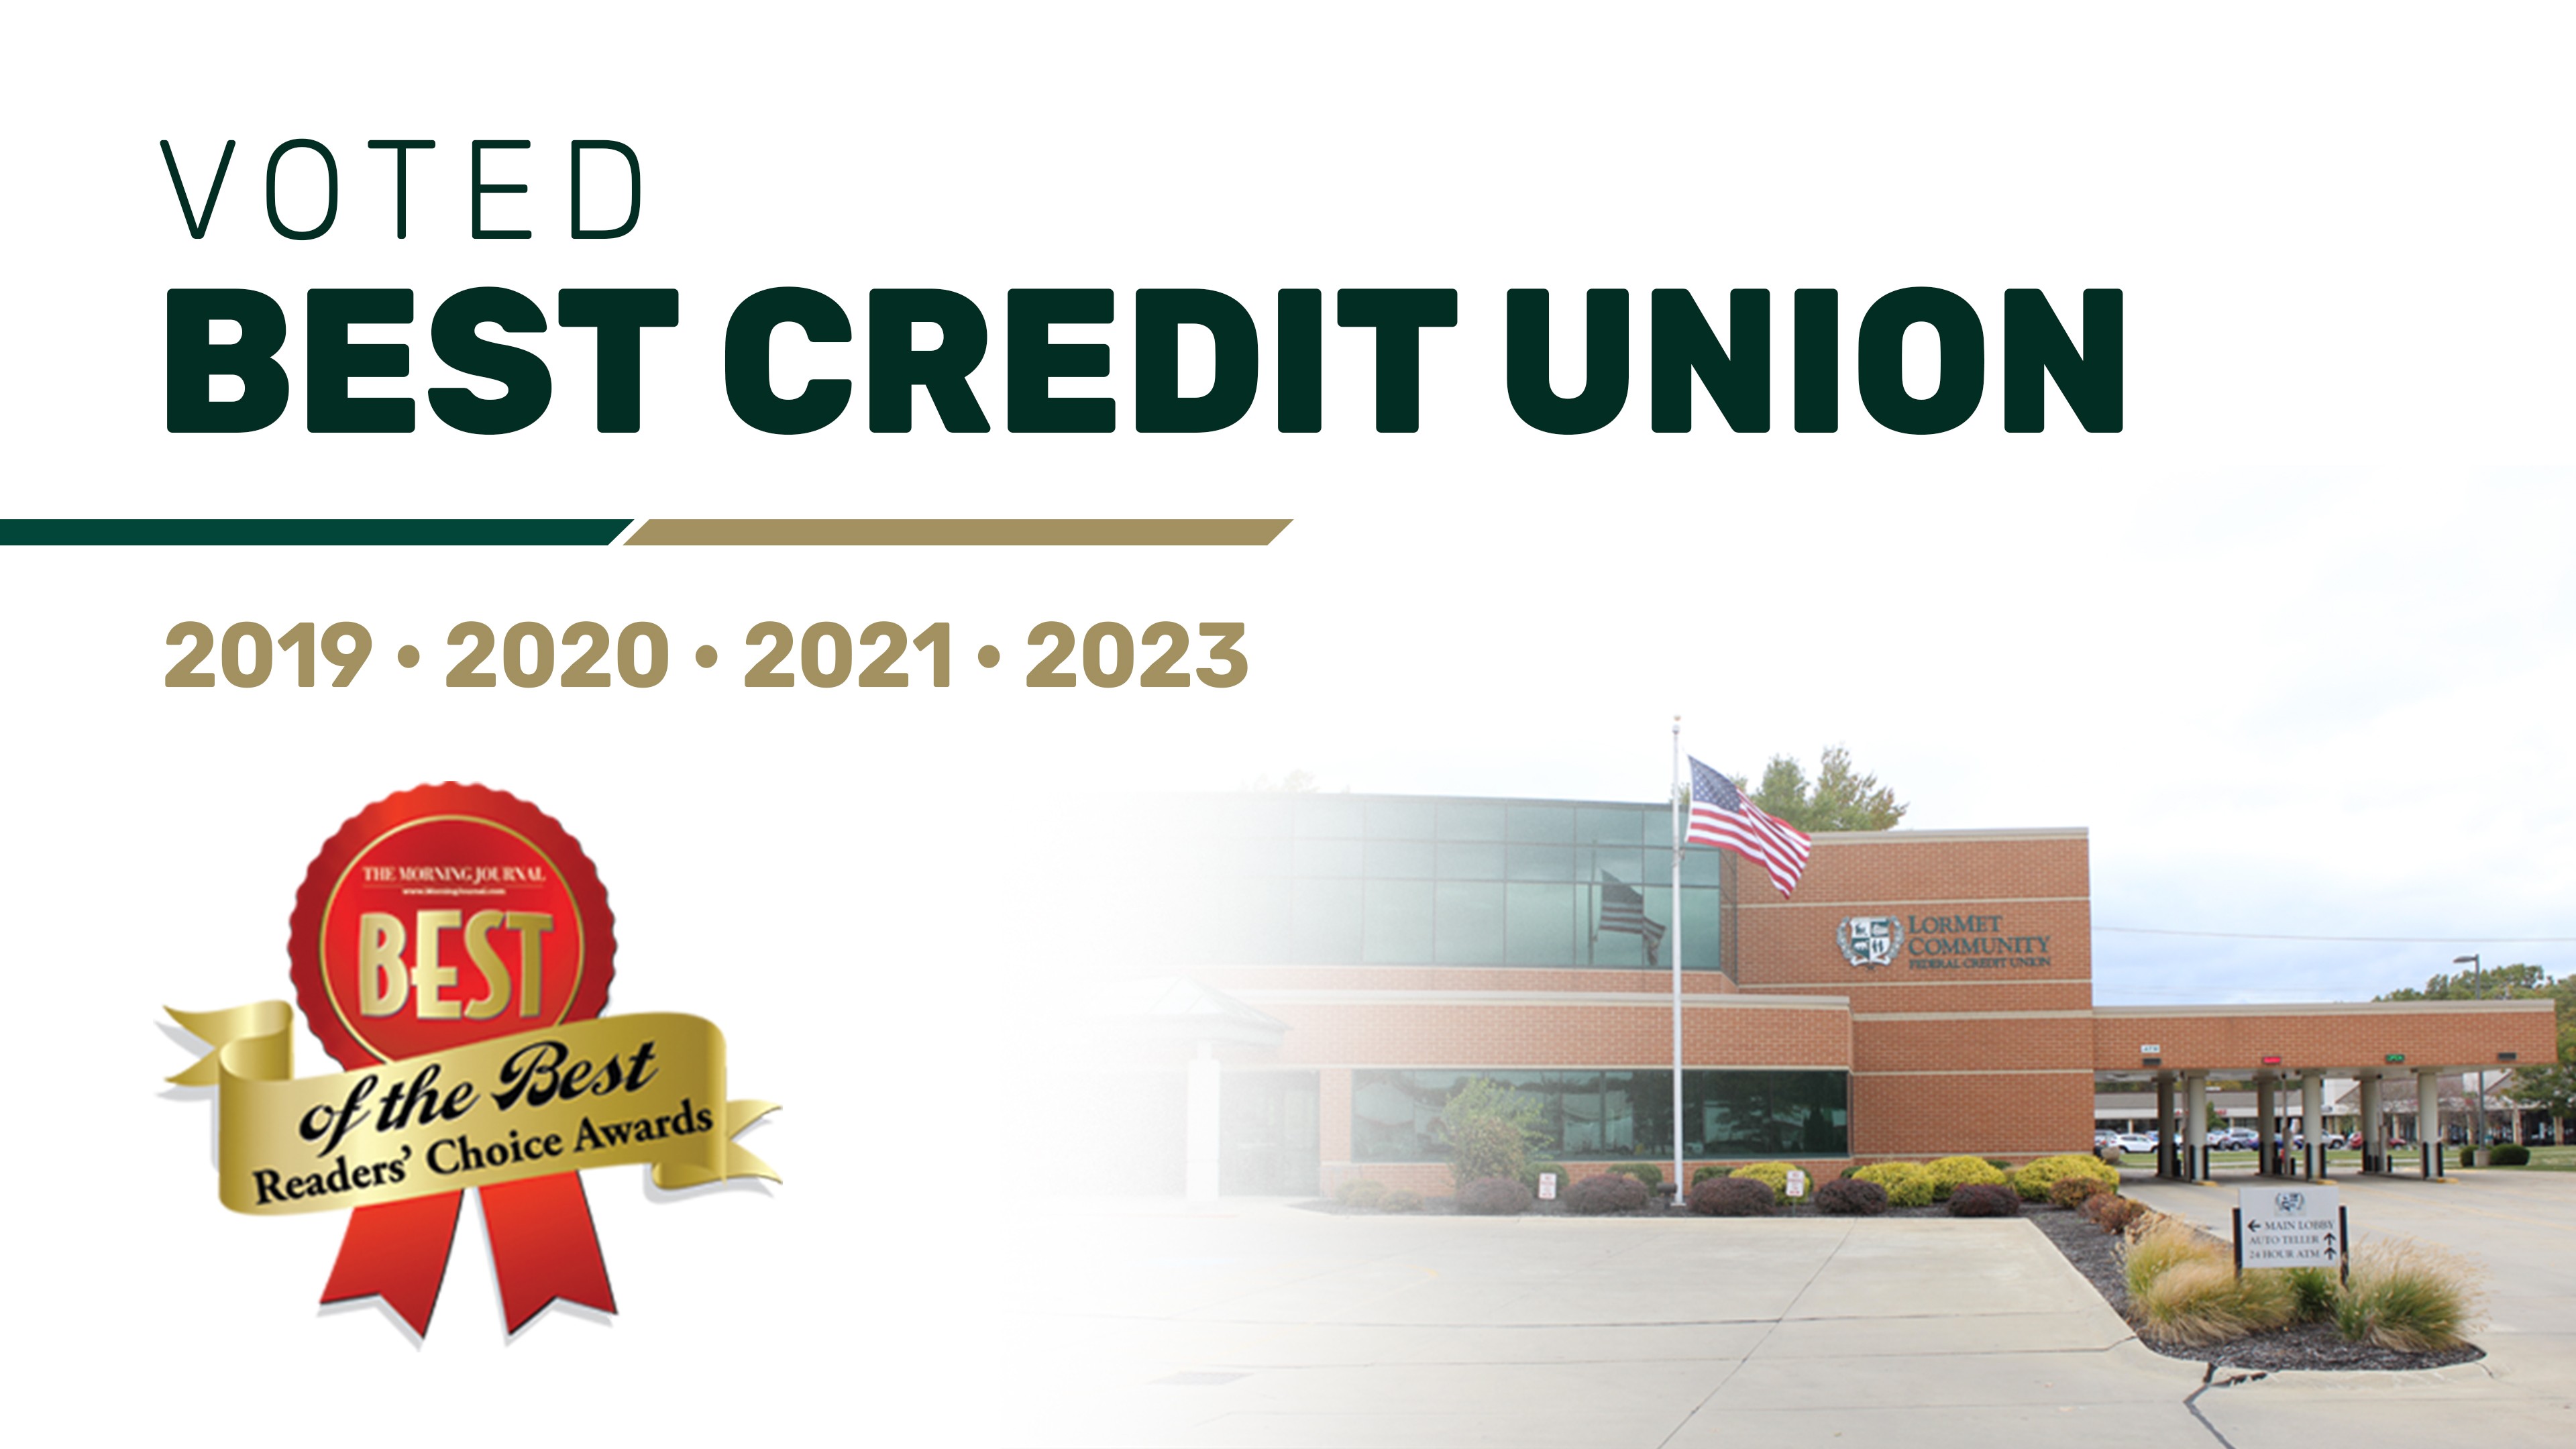 Voted Best Credit Union